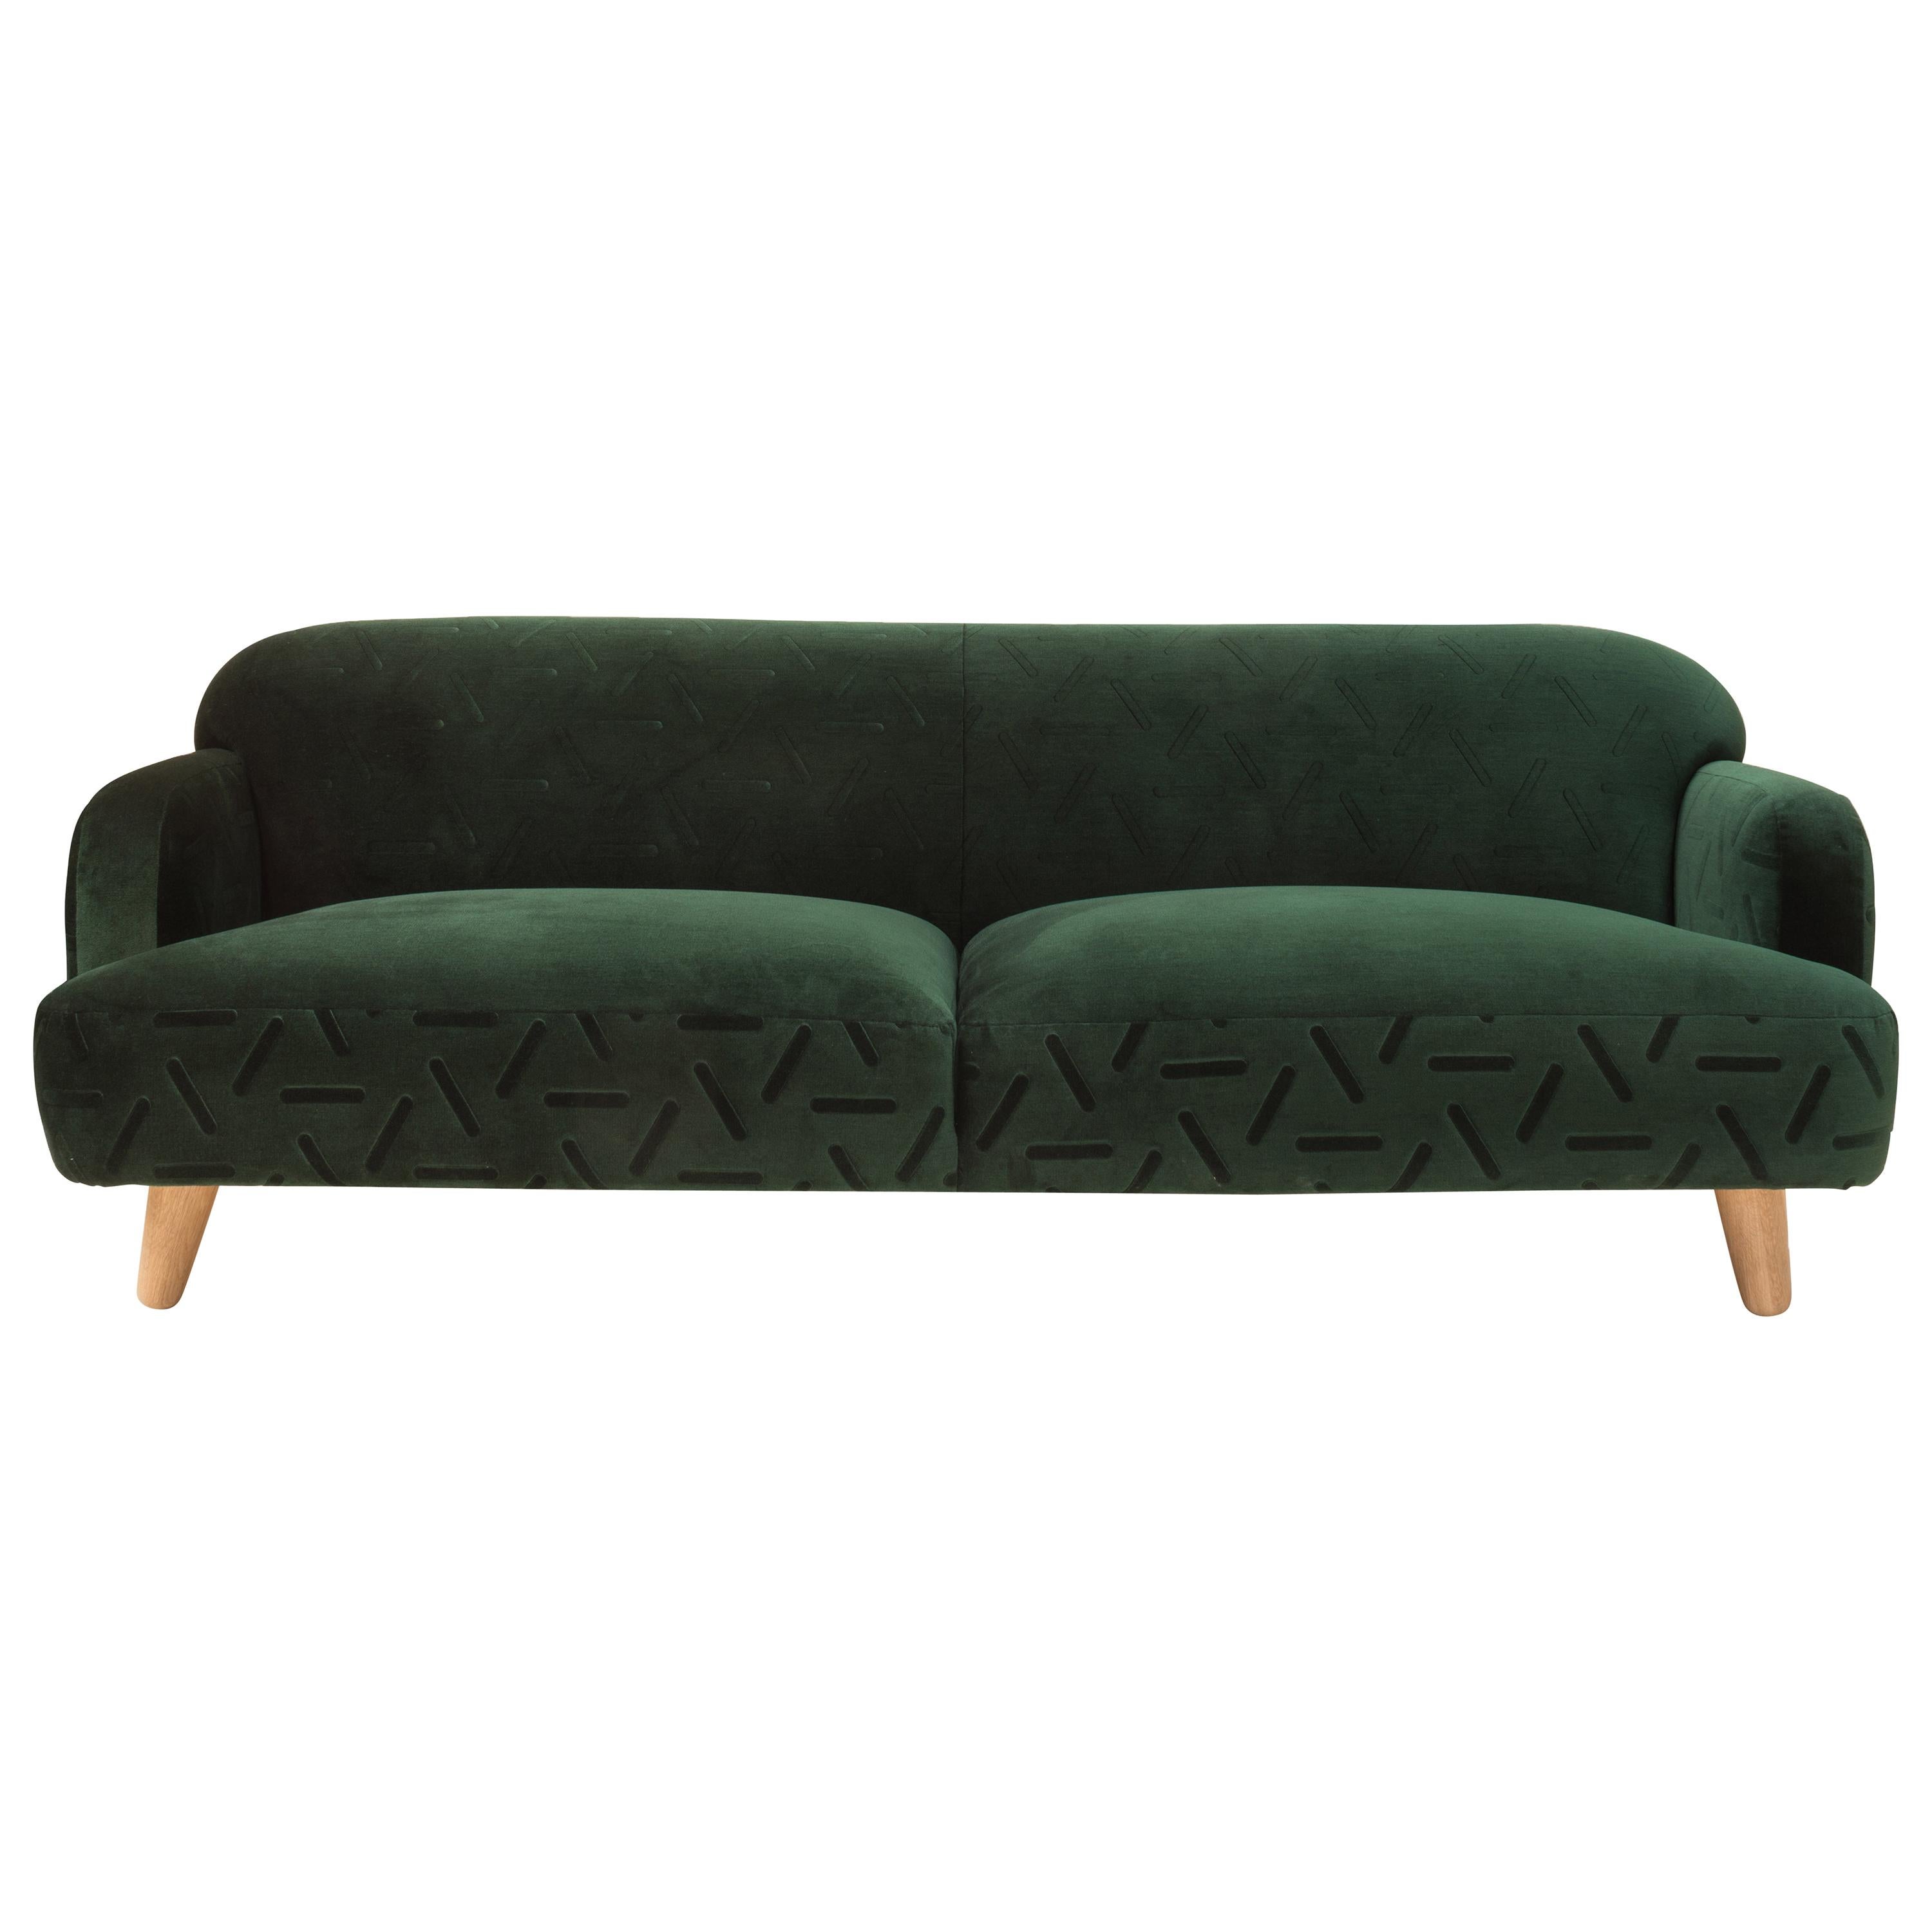 Glam Emboss Sofa By Mool For Sale At 1stdibs